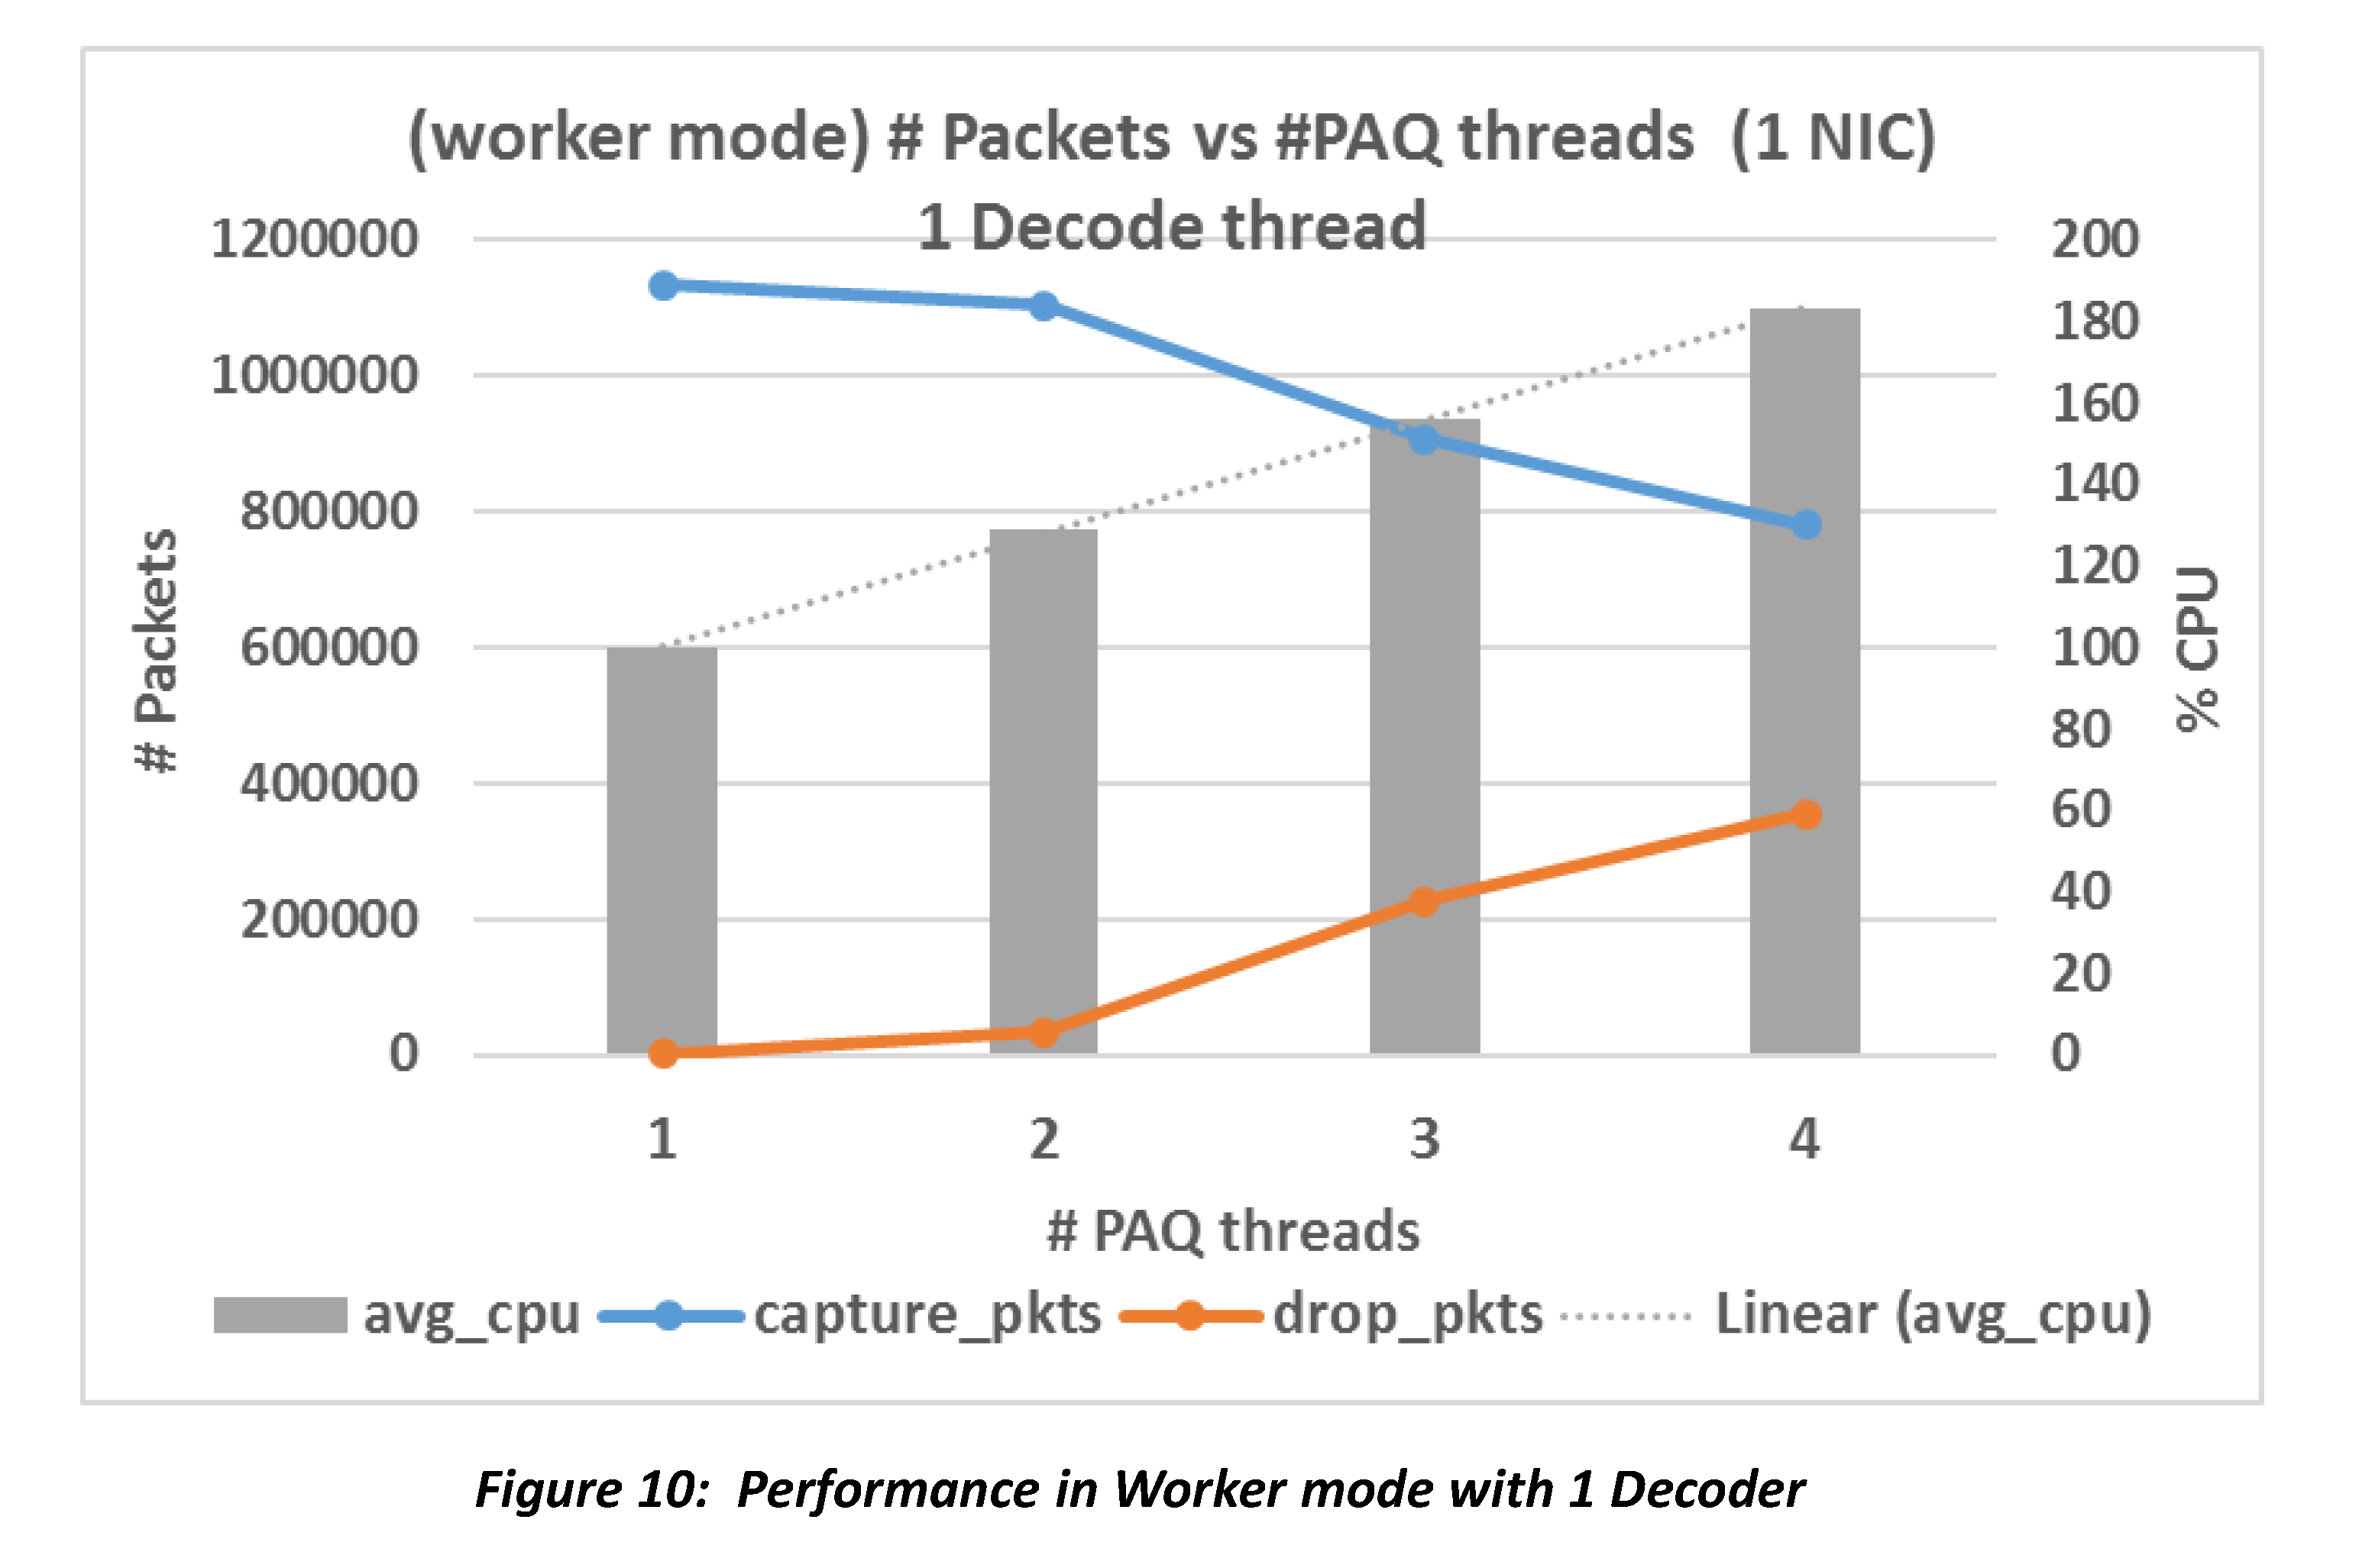 workers mode result with 1 decoder and 1-4 PAQs